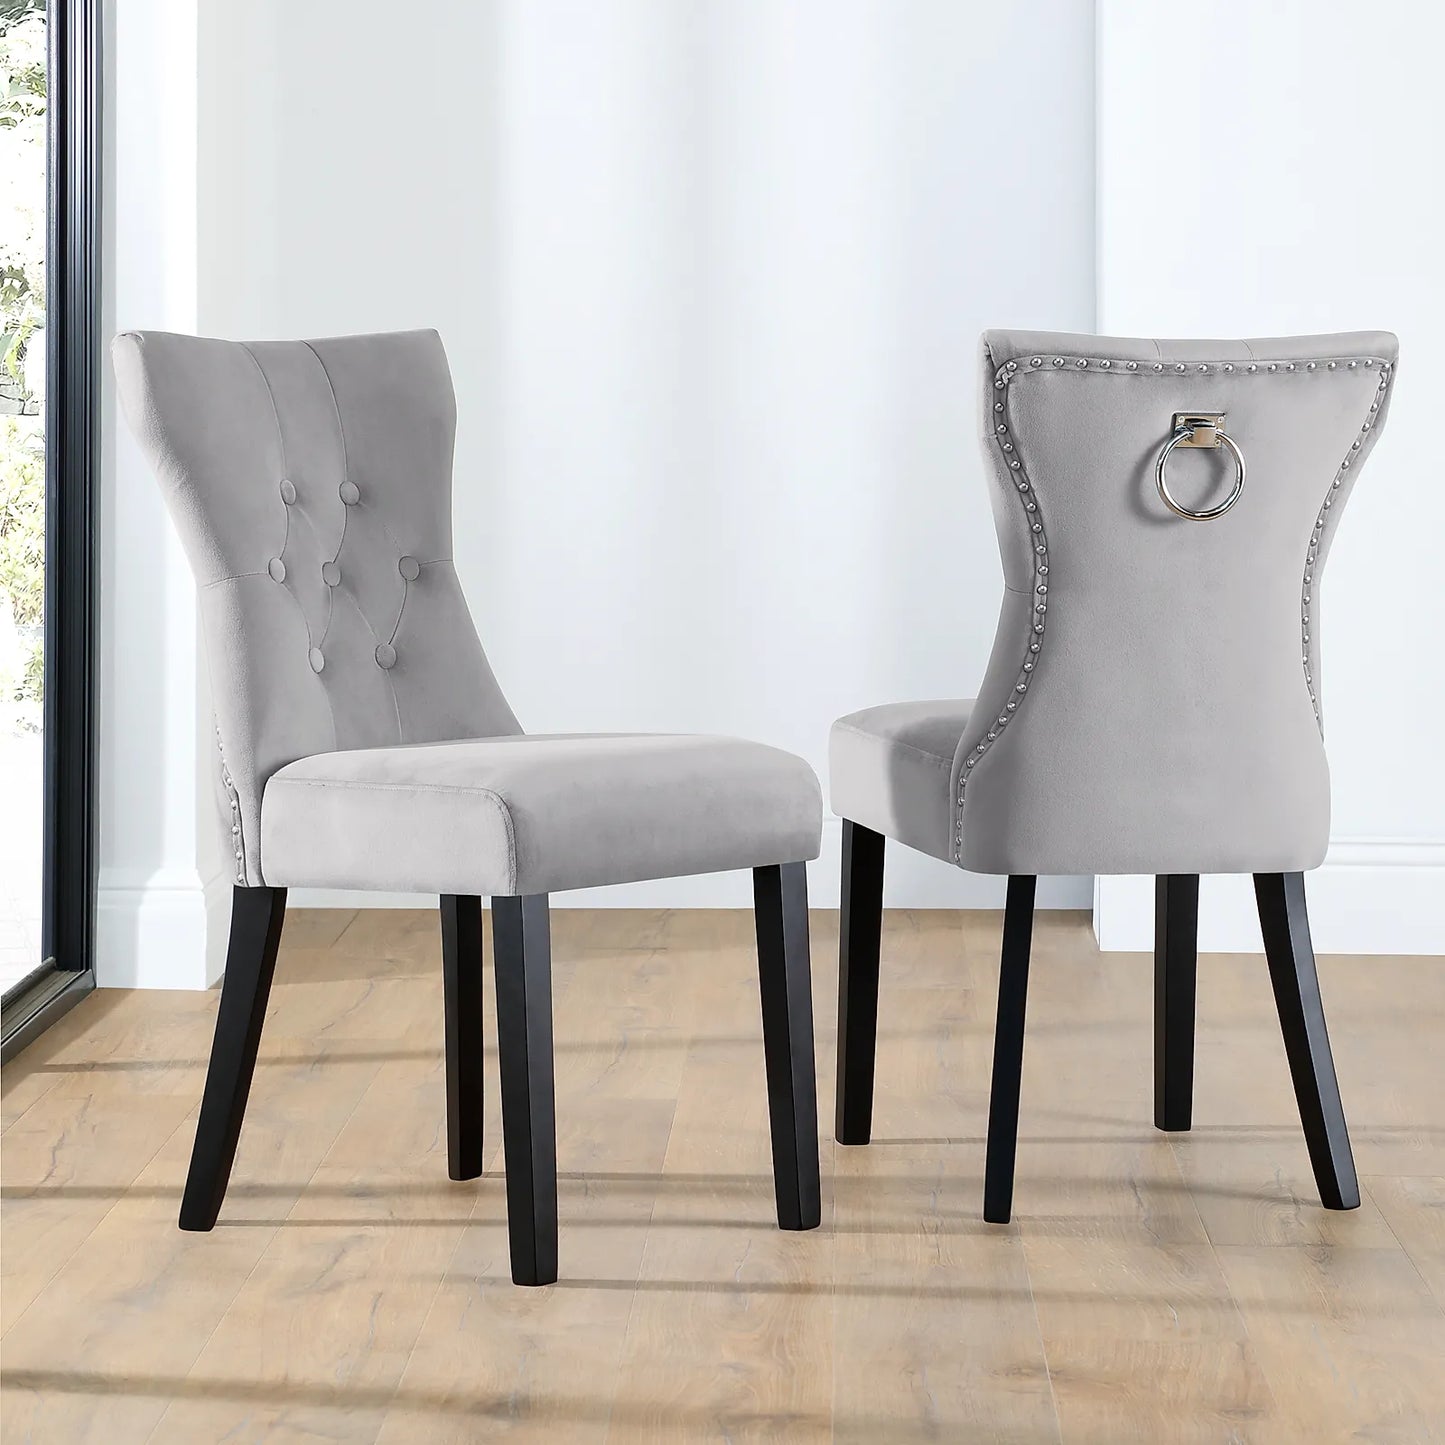 Kellington Buttoned Dining Chair - Set of 2